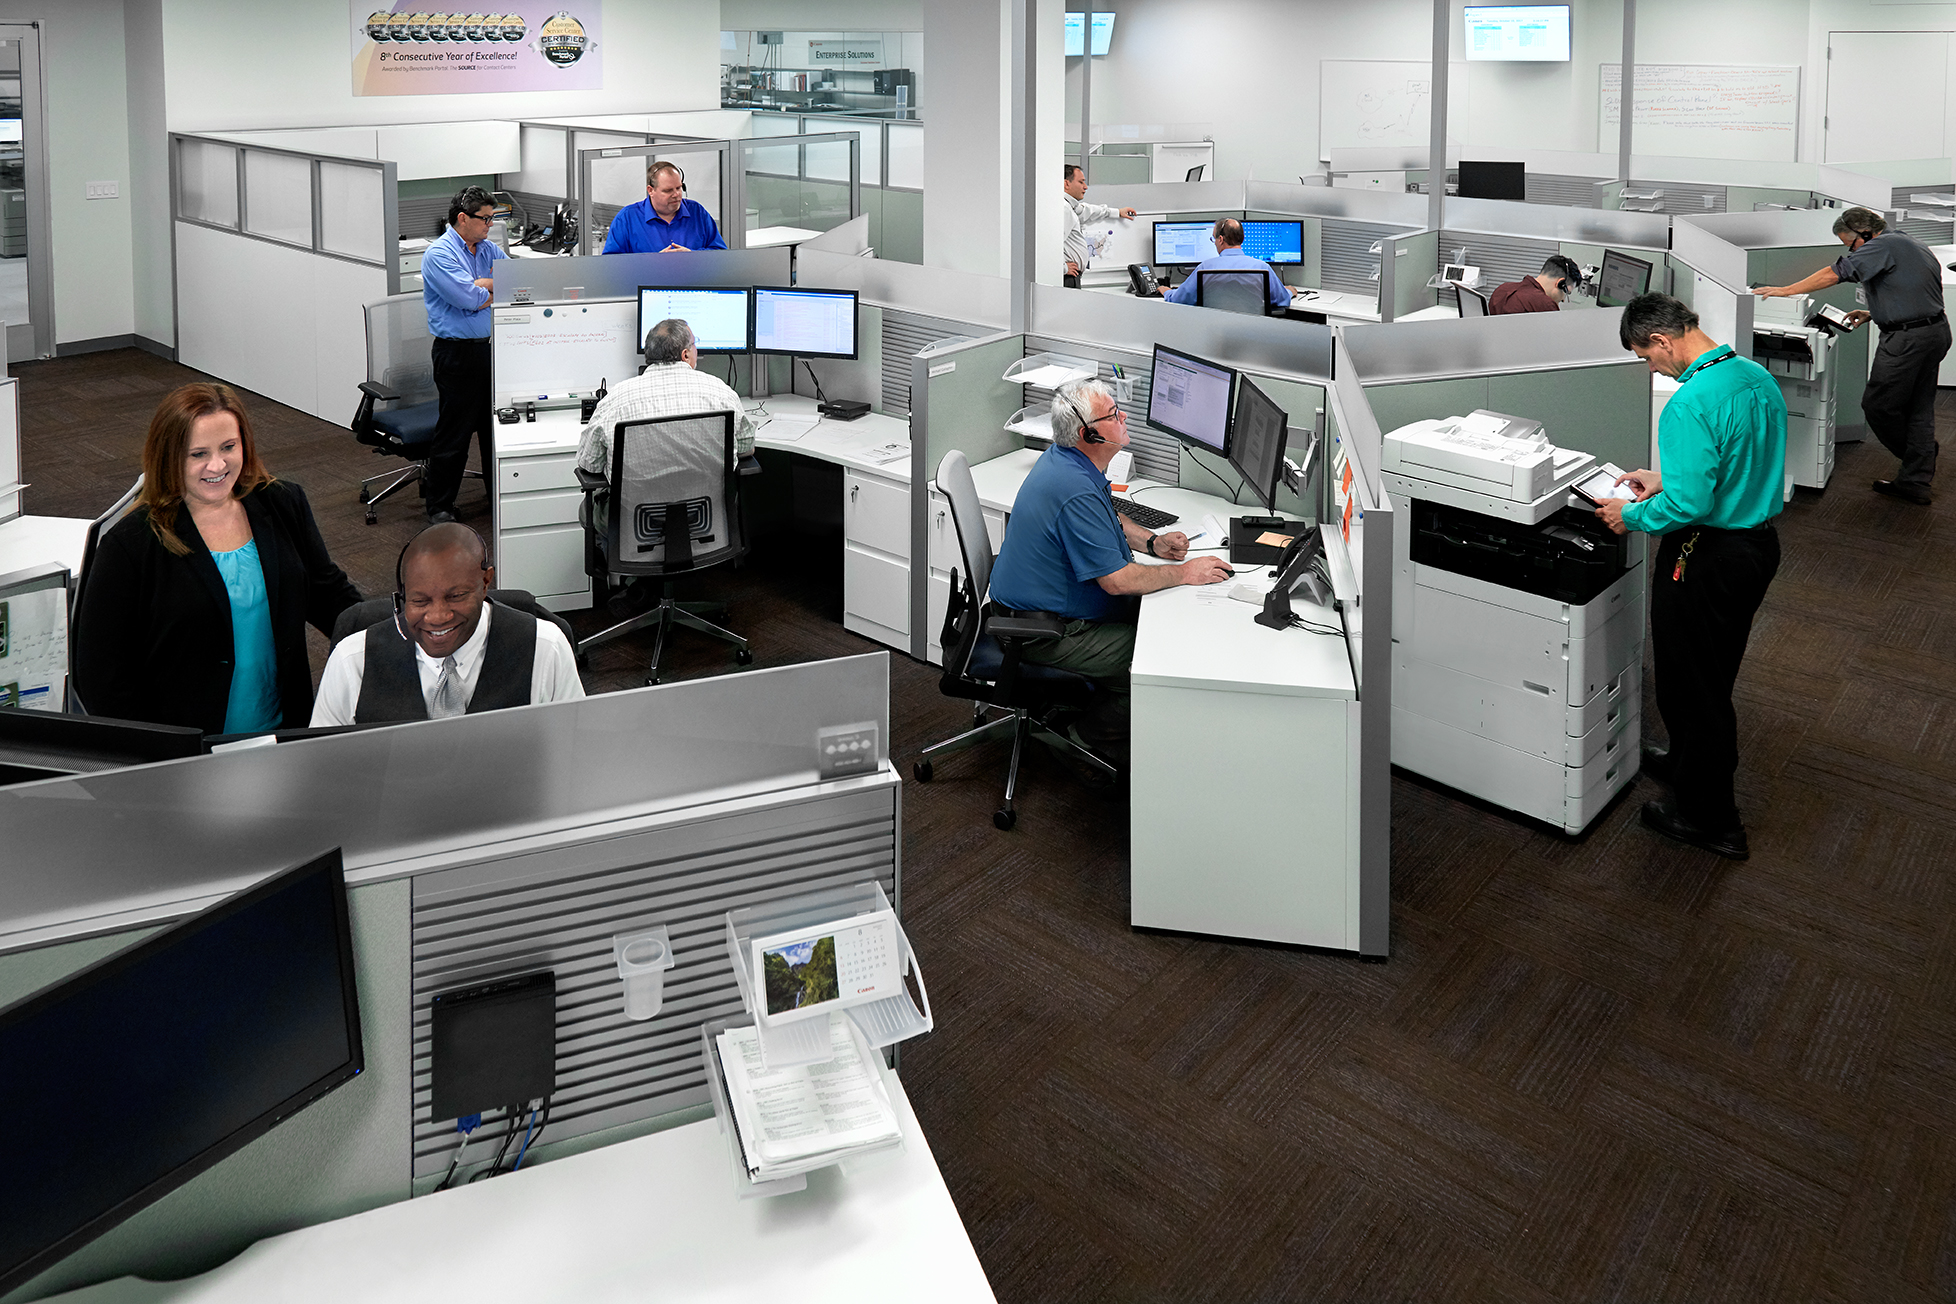 Canon U.S.A. Customer Service Center Certified for Excellence